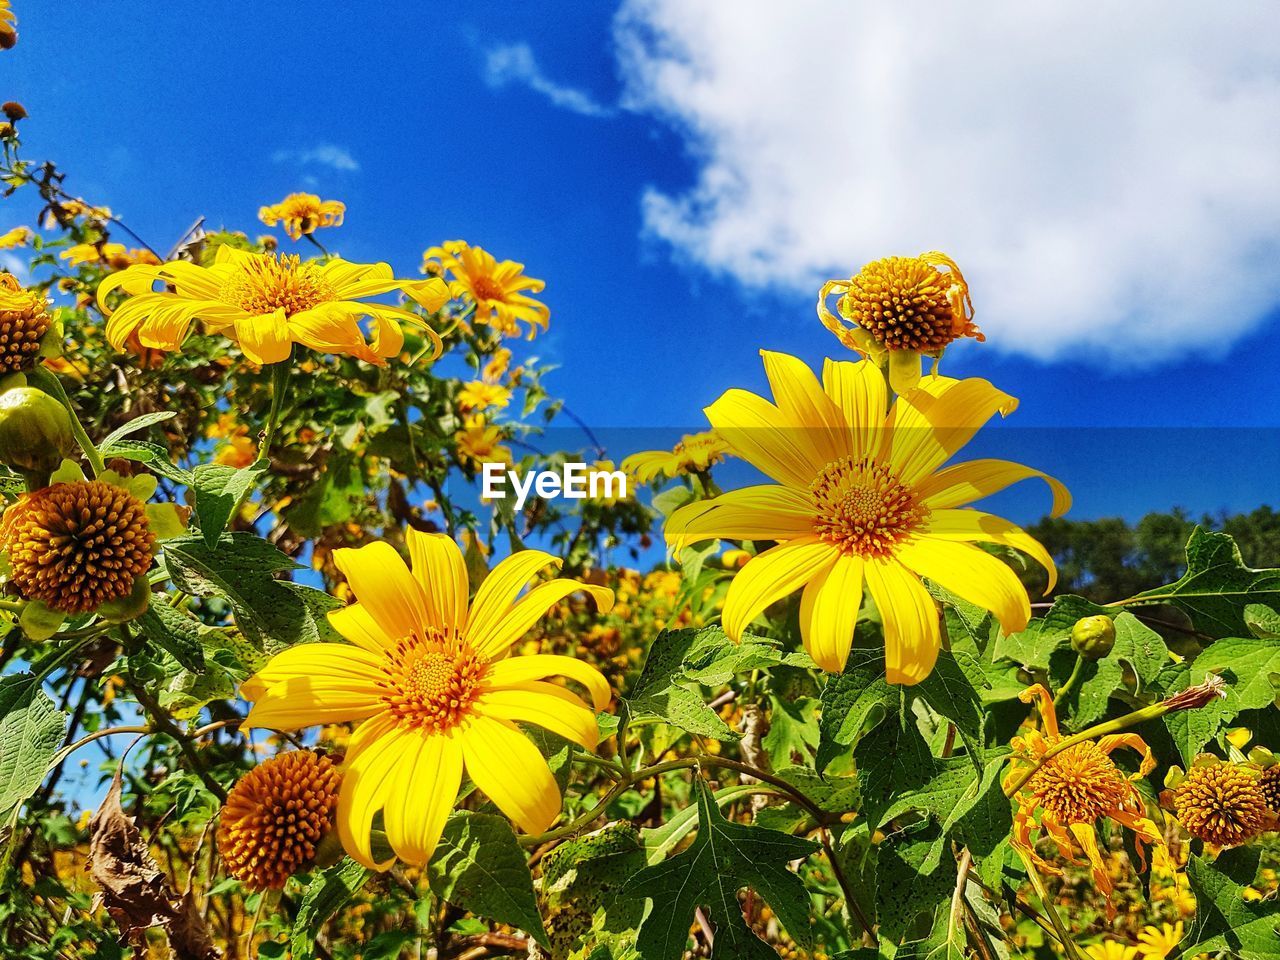 CLOSE-UP OF YELLOW FLOWERING PLANTS AGAINST SKY